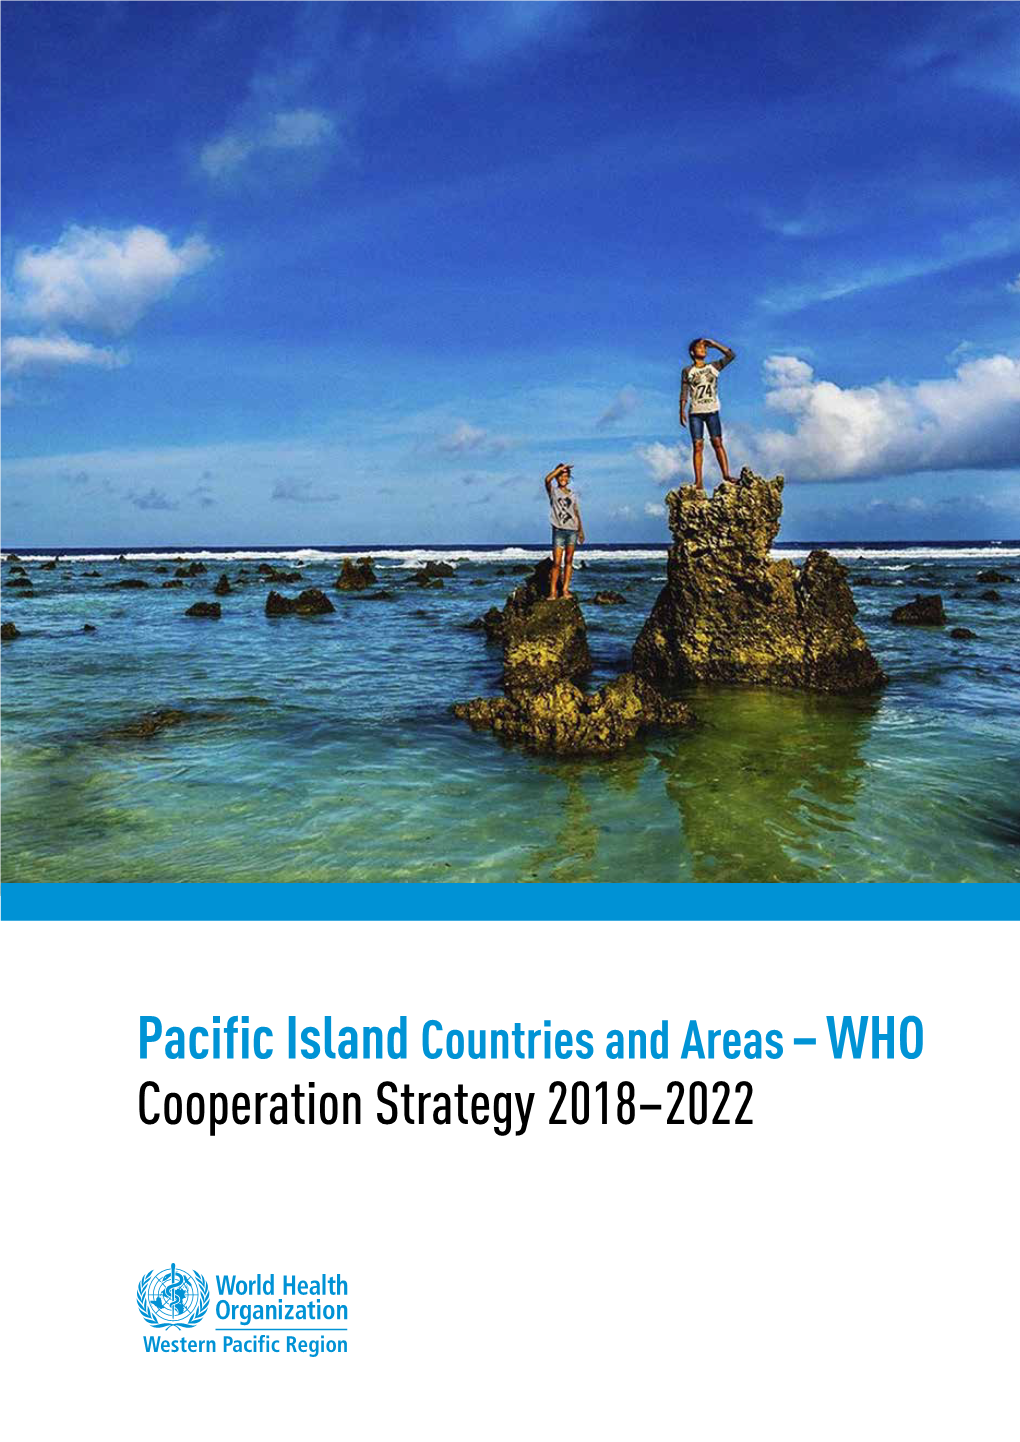 WHO Cooperation Strategy for the Pacific 2018-2022